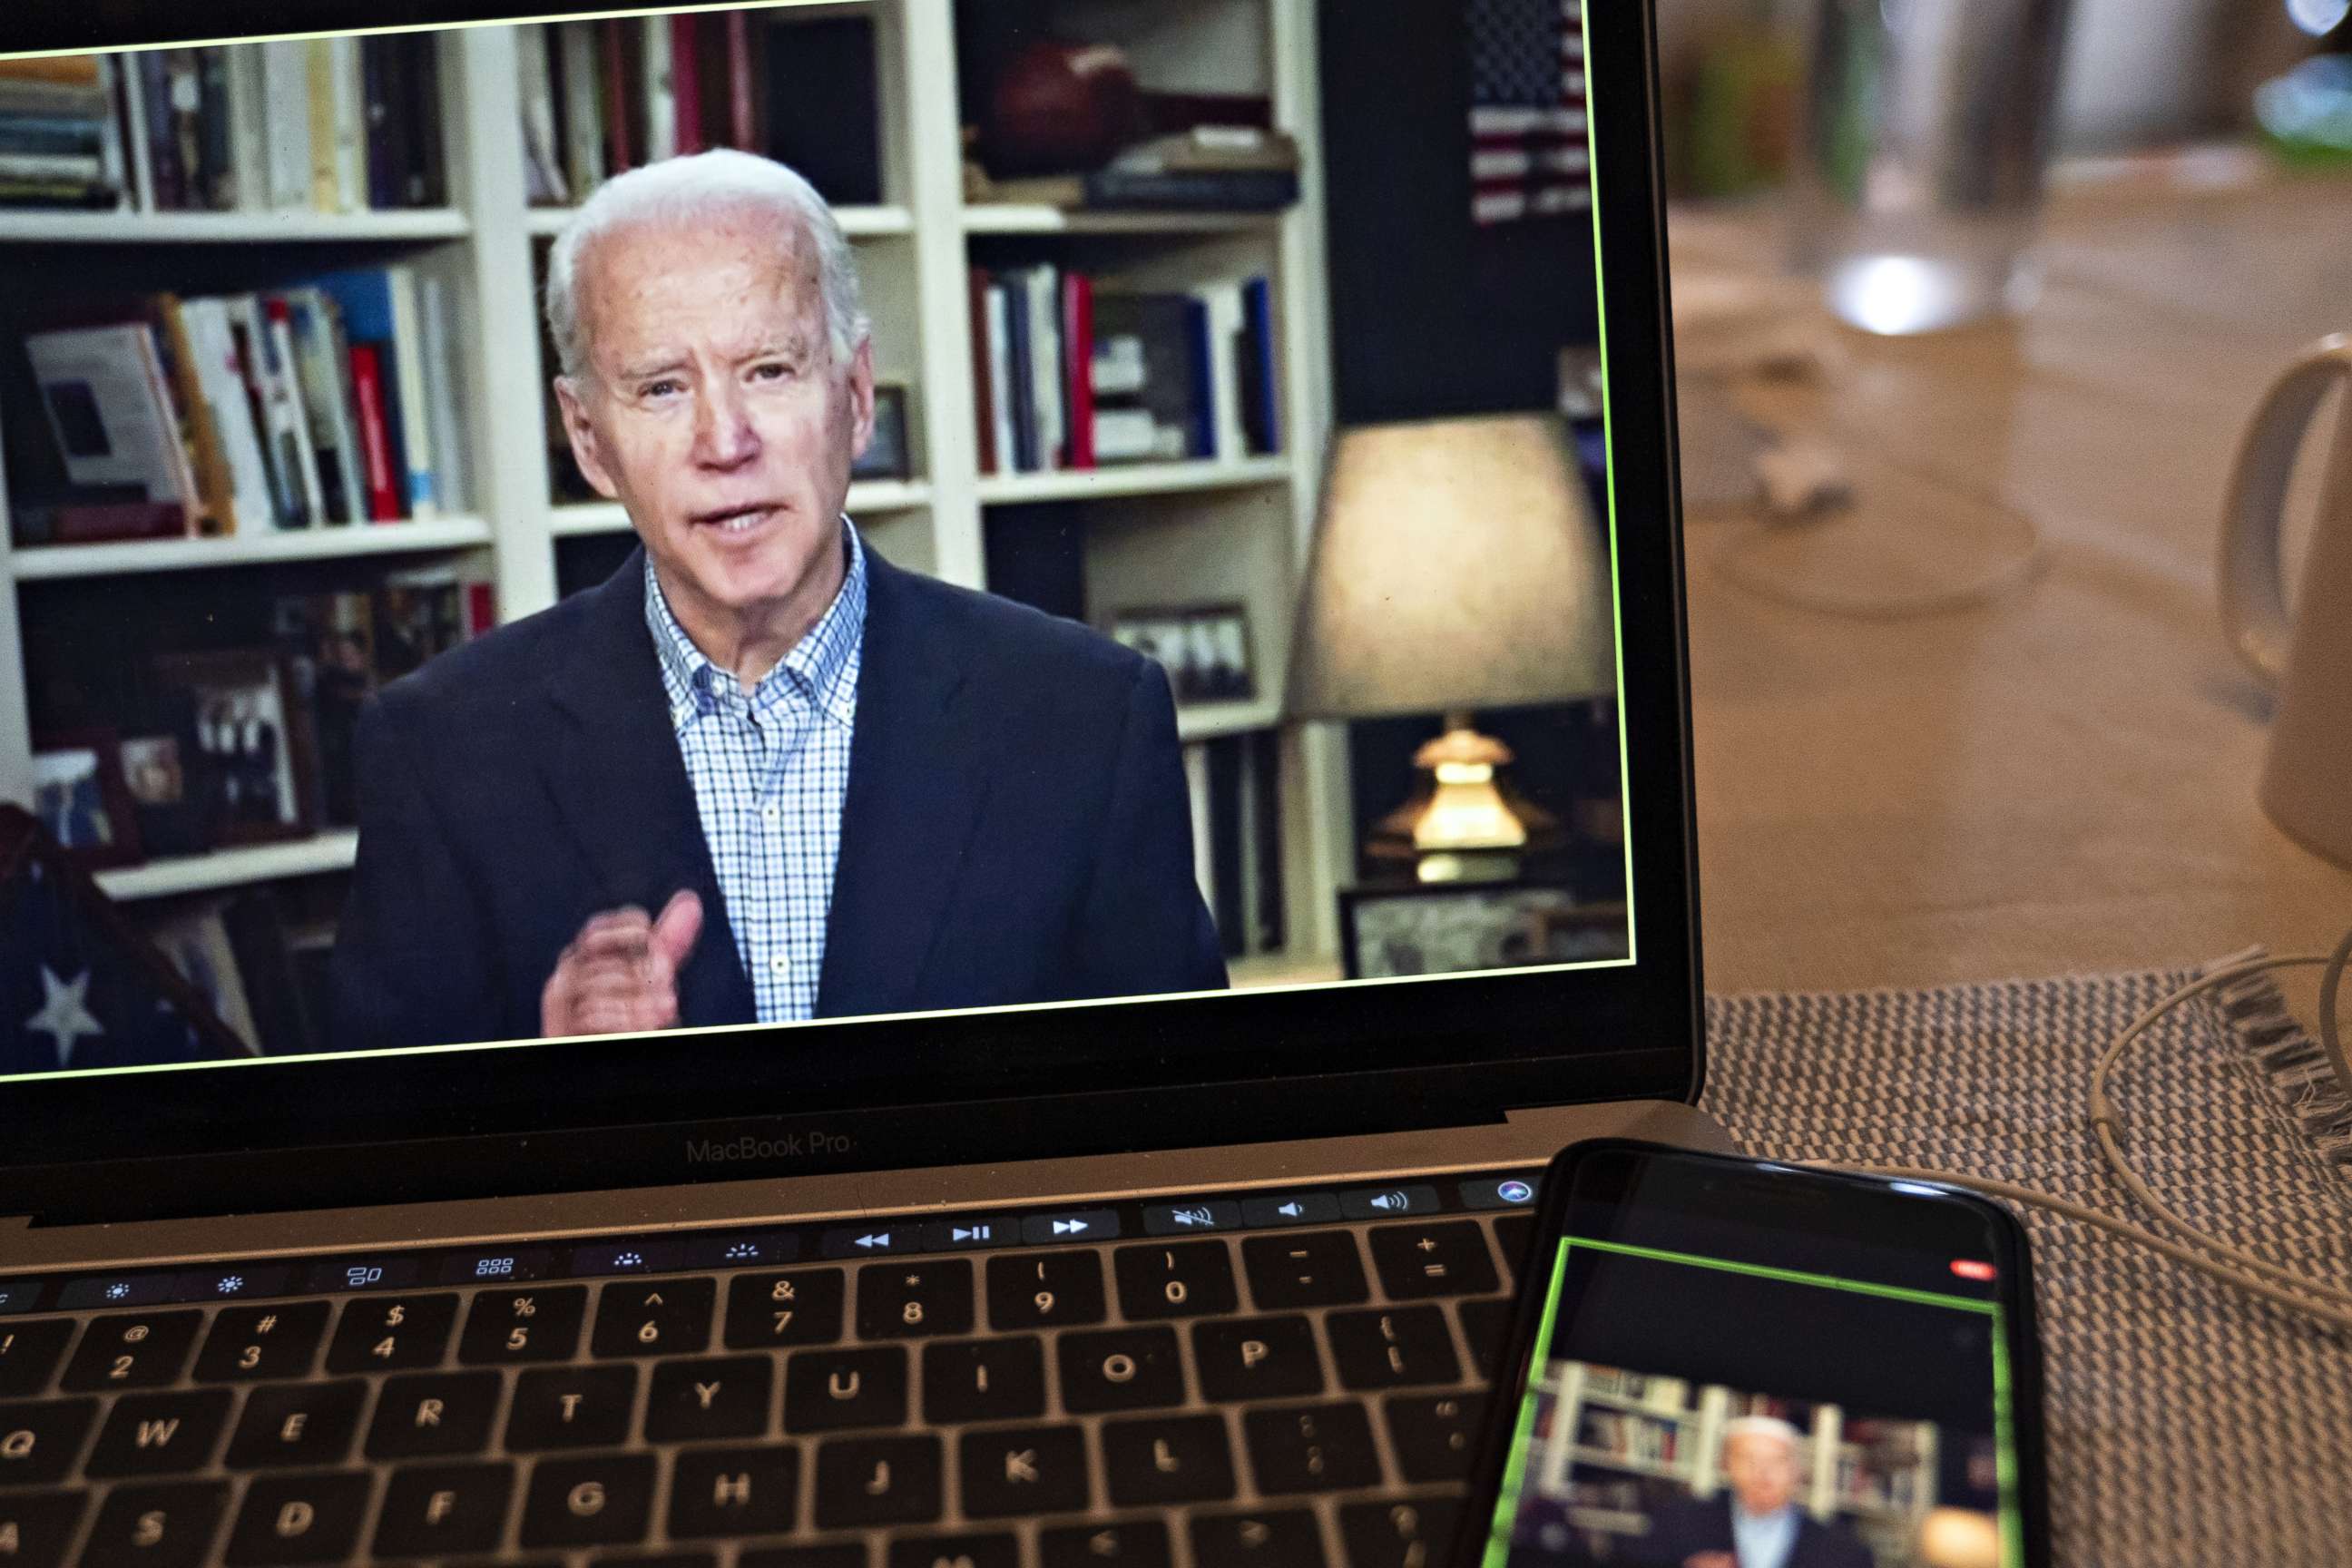 PHOTO: Former Vice President Joe Biden, 2020 Democratic presidential candidate, speaks during a virtual press briefing on a laptop computer in this arranged photograph in Arlington, Virginia, U.S., on Wednesday, March 25, 2020.